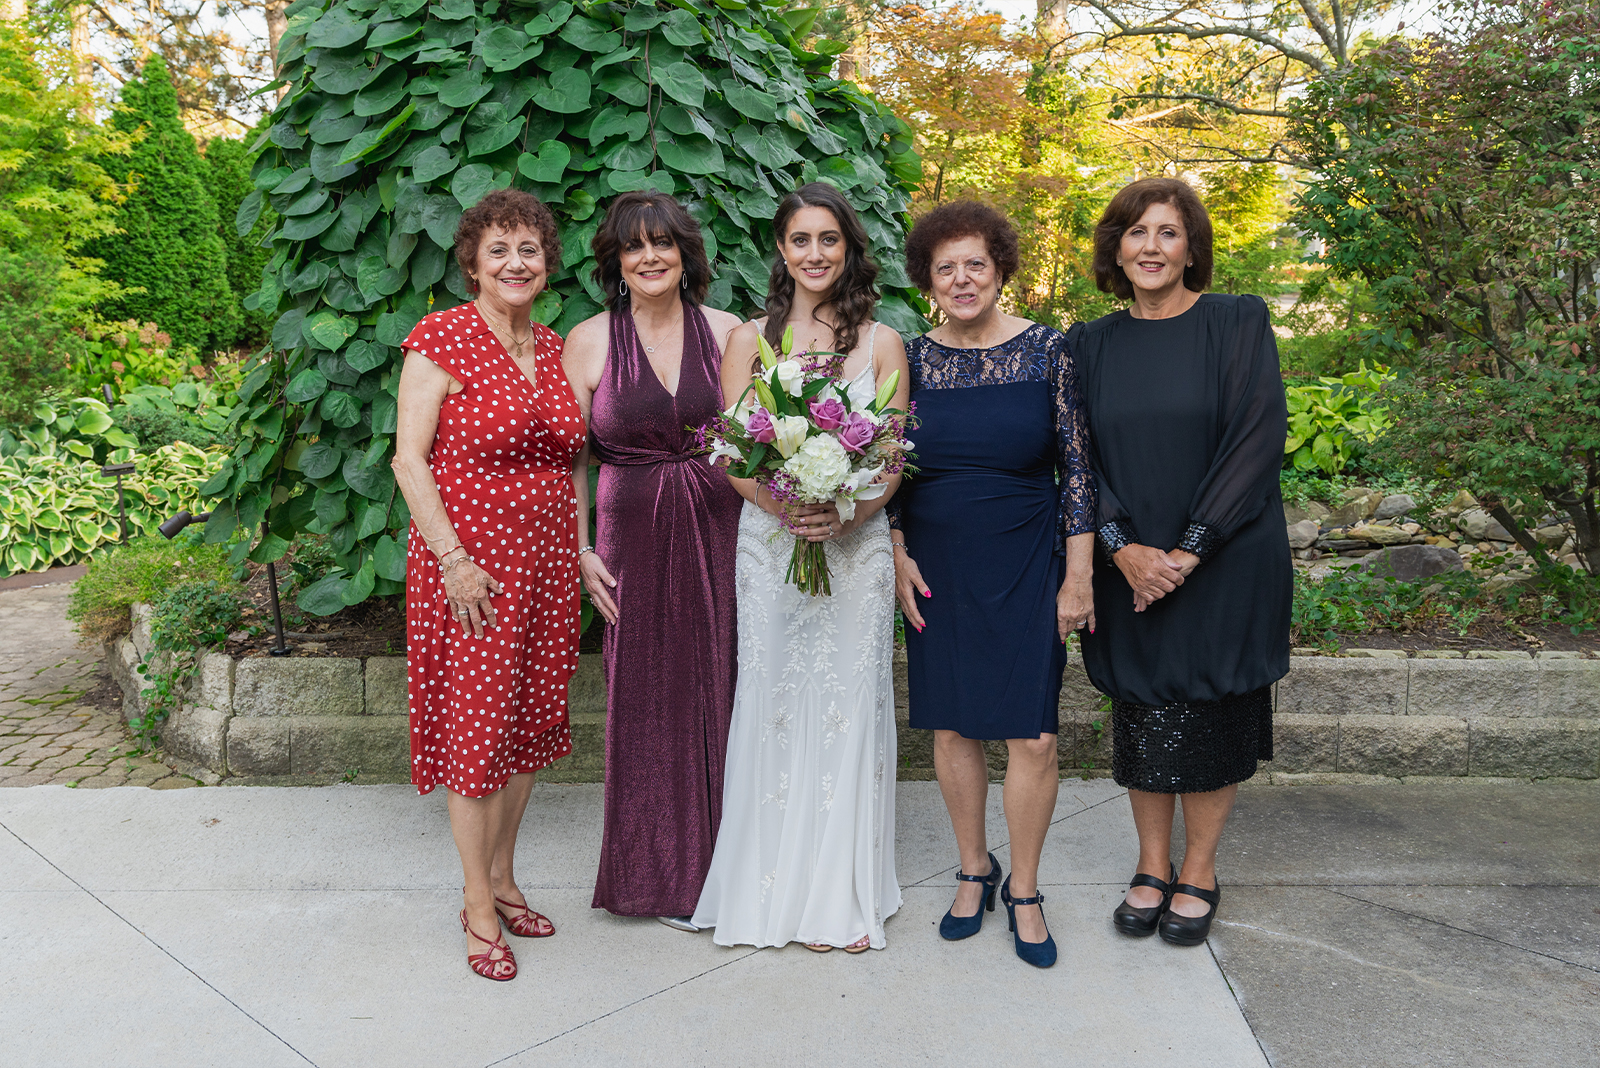 Bride and family, family portrait, wedding portrait, nature, green, trees, bushes, classy wedding ceremony at Landerhaven, Mayfield Heights OH